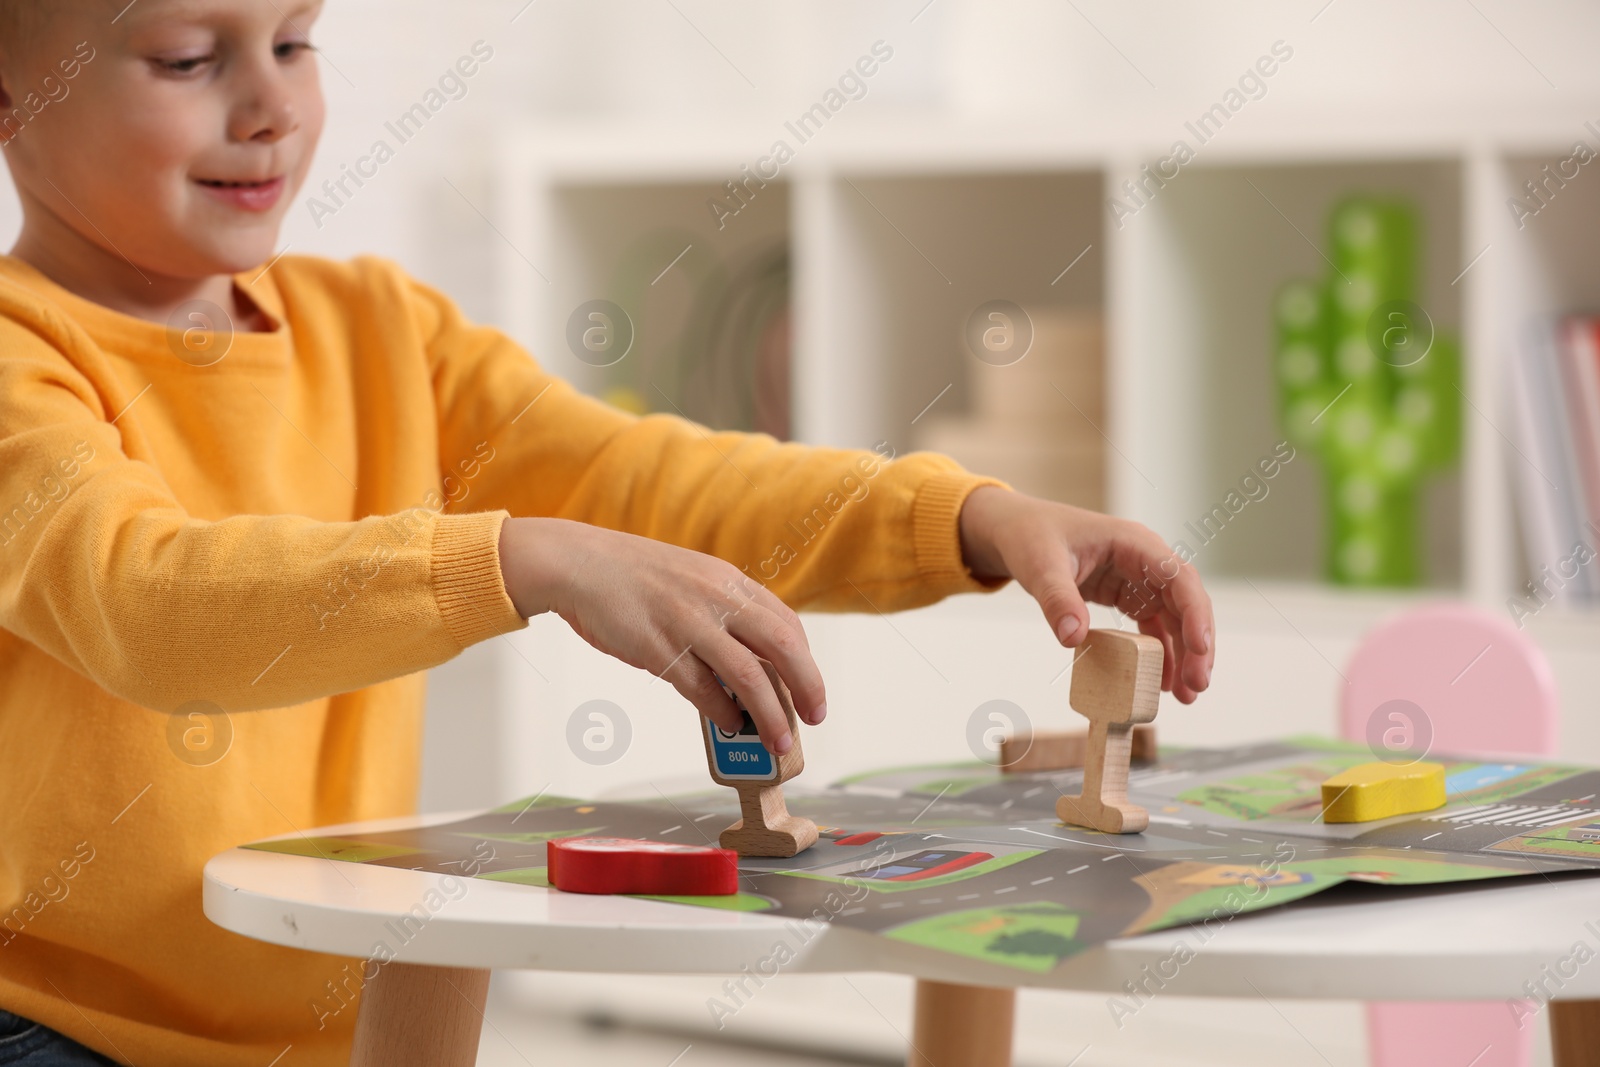 Photo of Cute little boy playing with set of wooden road signs and cars at table indoors, closeup. Child's toy